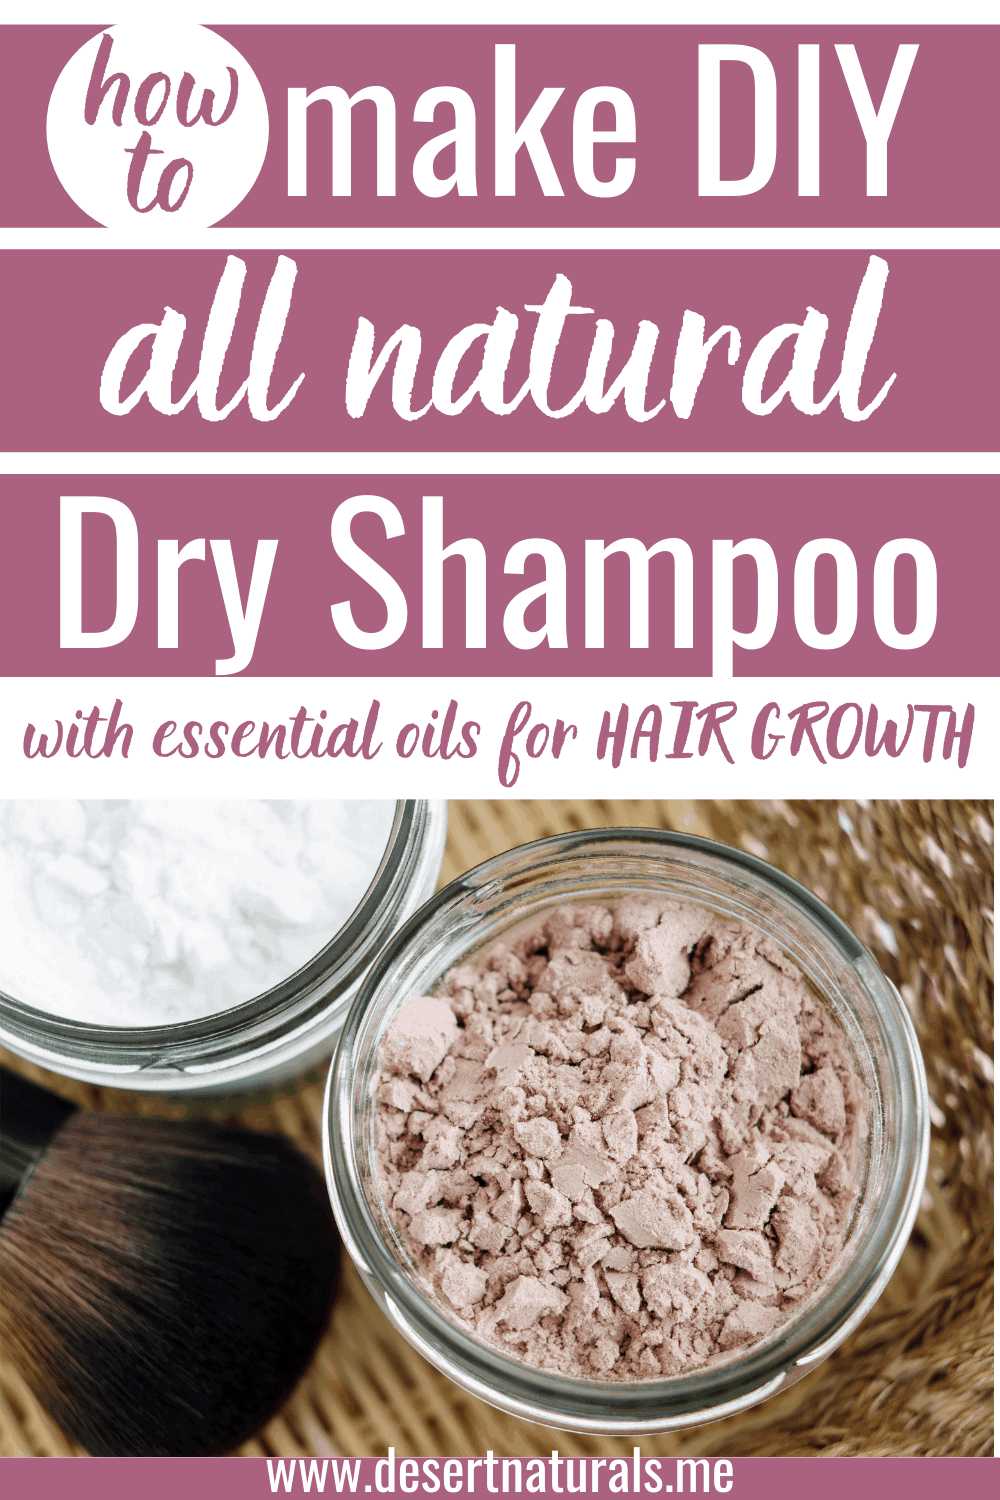 how to make diy all natural dry shampoo with essential oils for hair growth. for dark and light hair with a makeup brush to apply